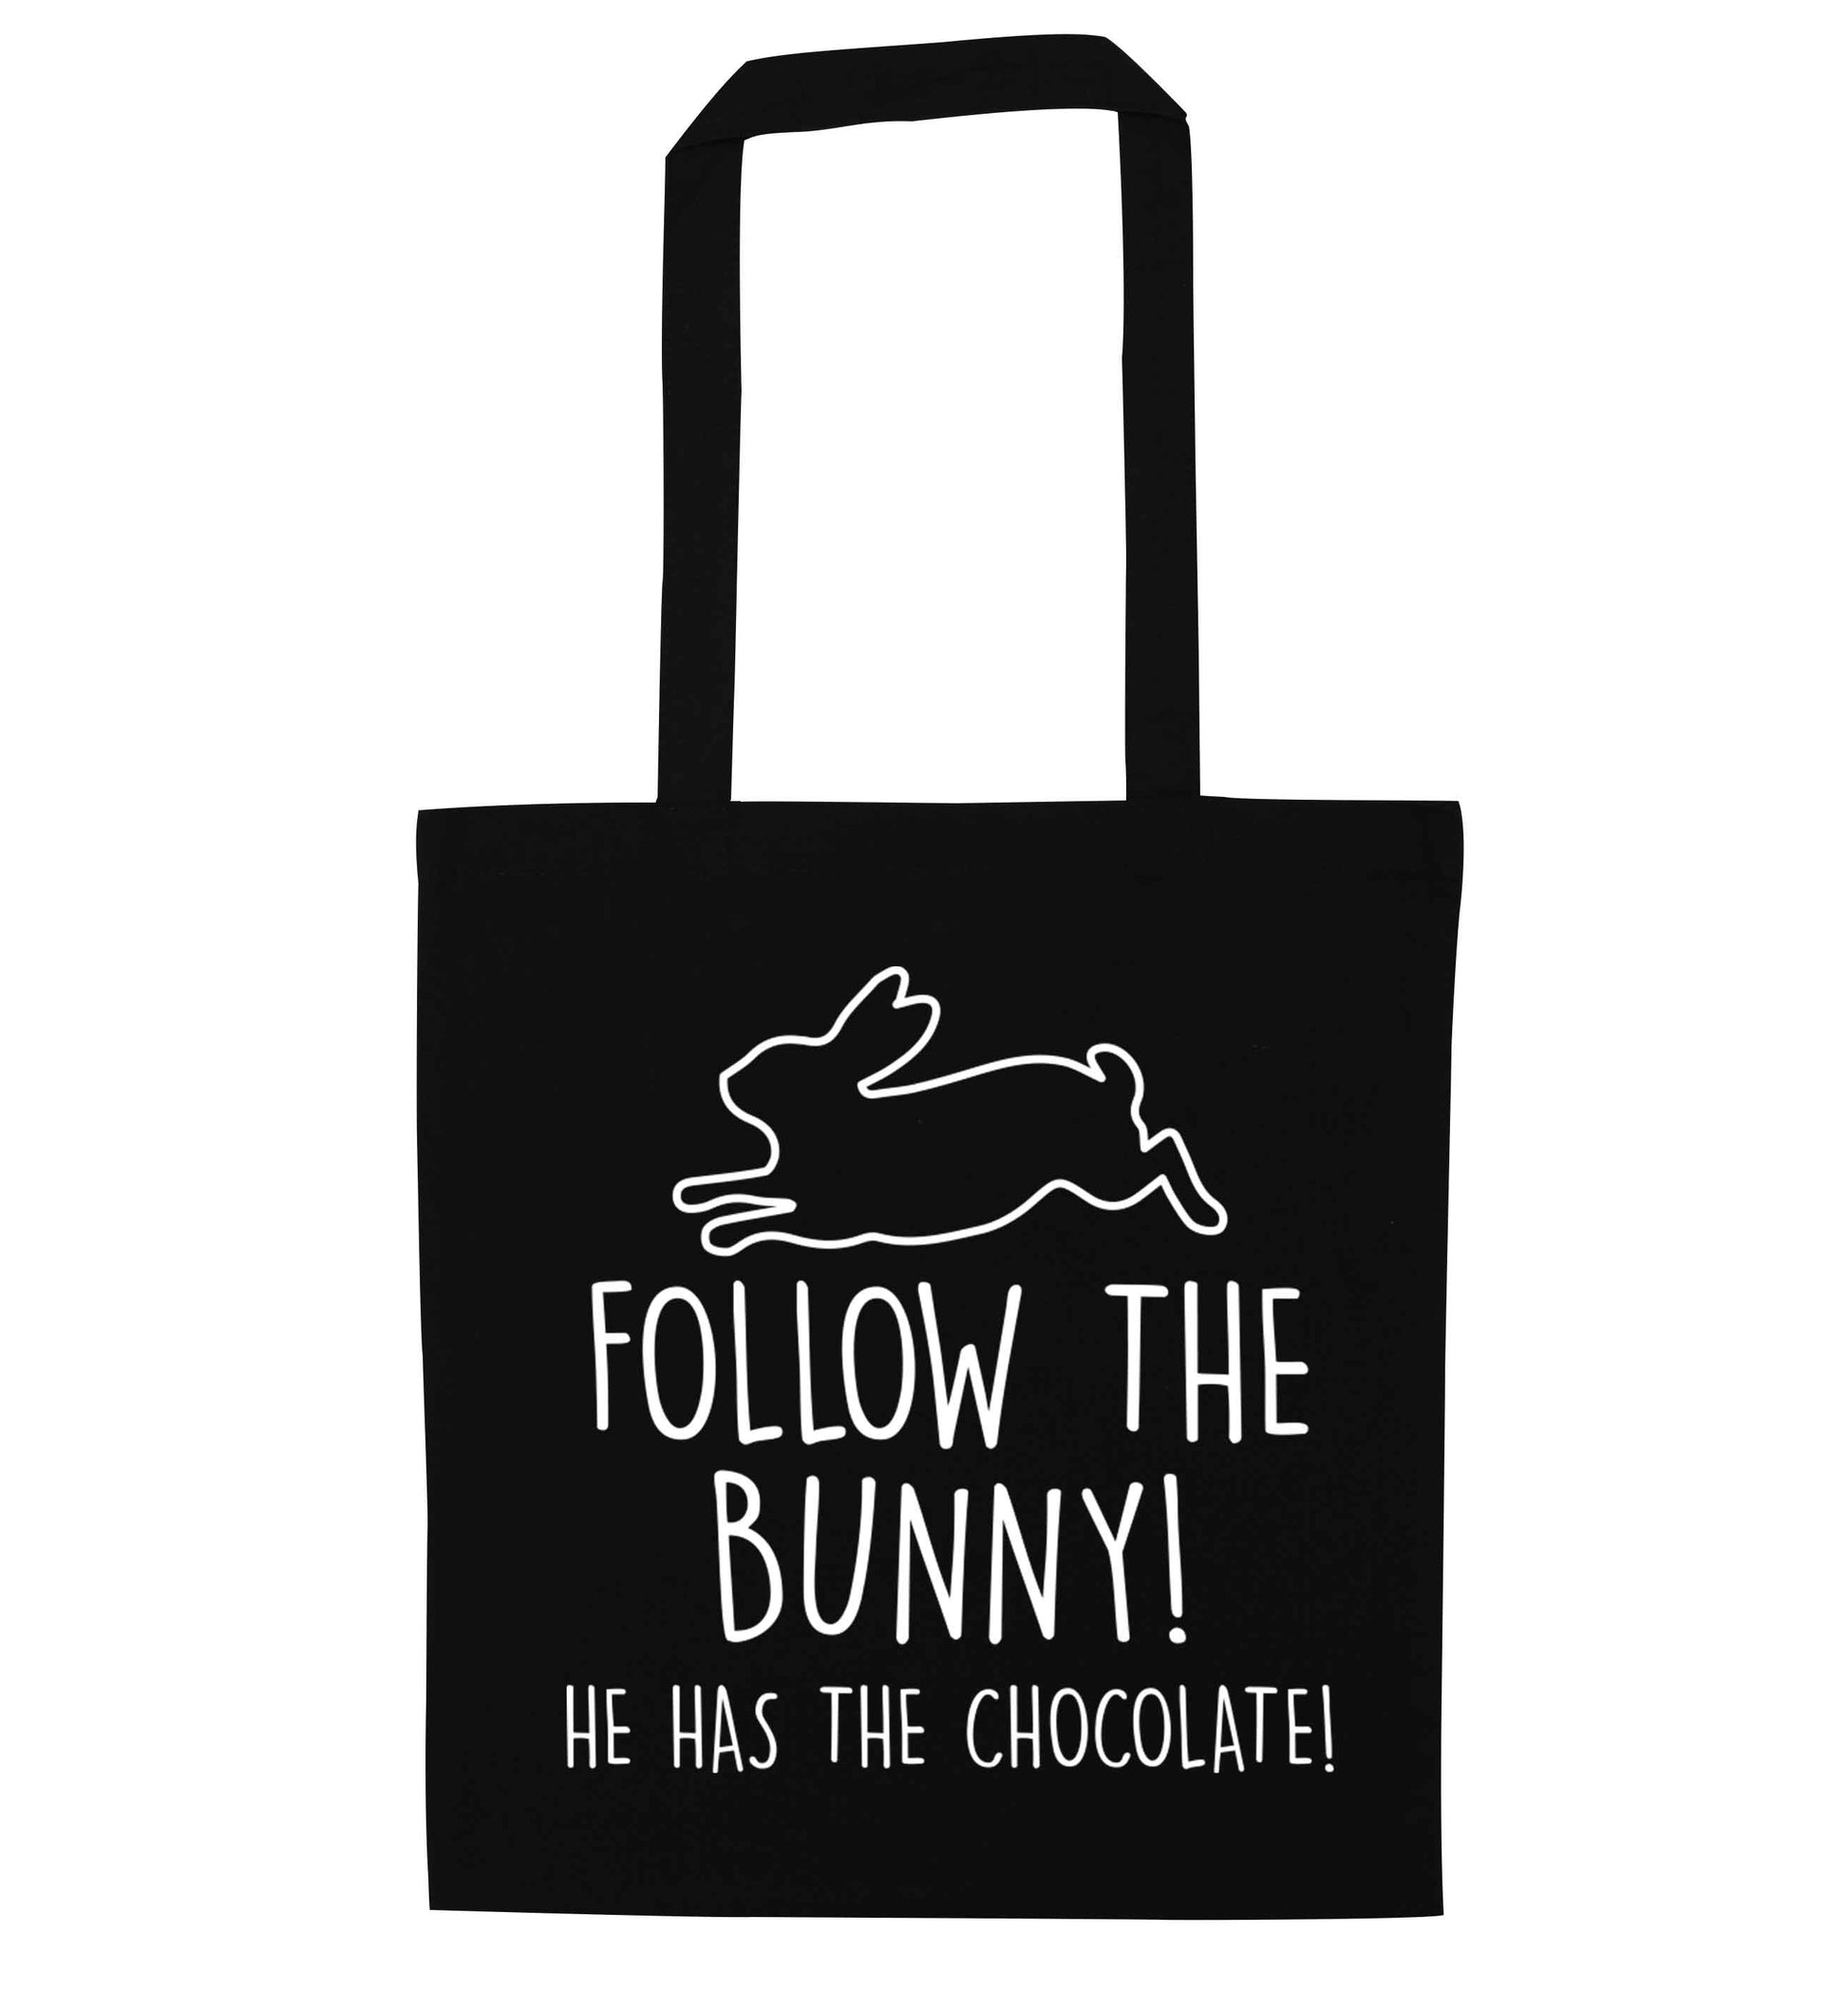 Follow the bunny! He has the chocolate black tote bag